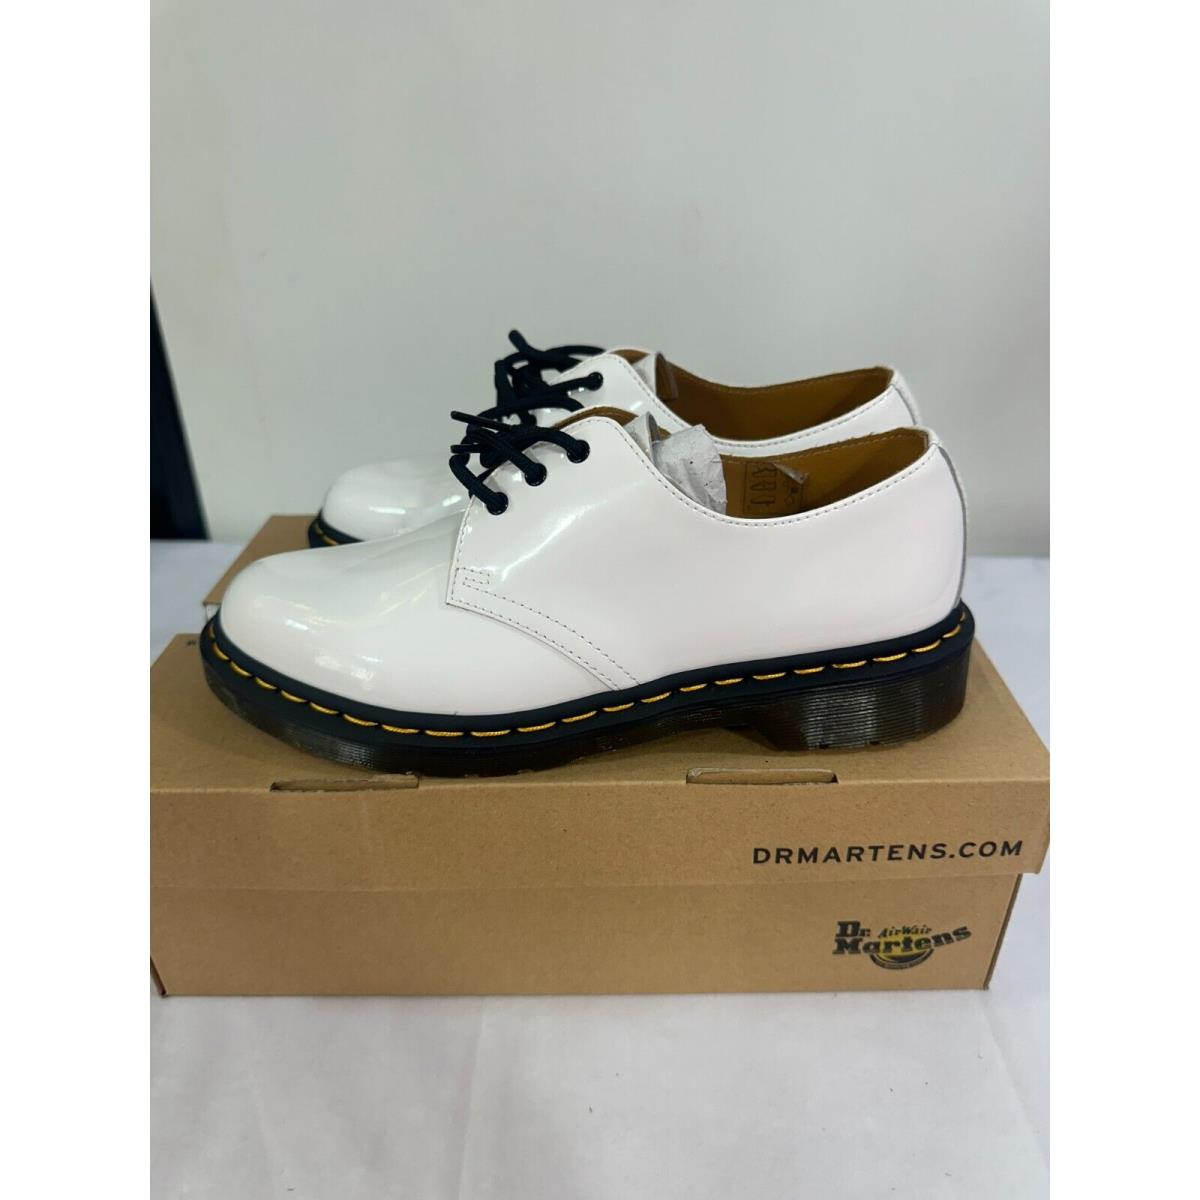 Dr. Martens Women s White Patent Leather Oxford Shoes Size 9 26754100